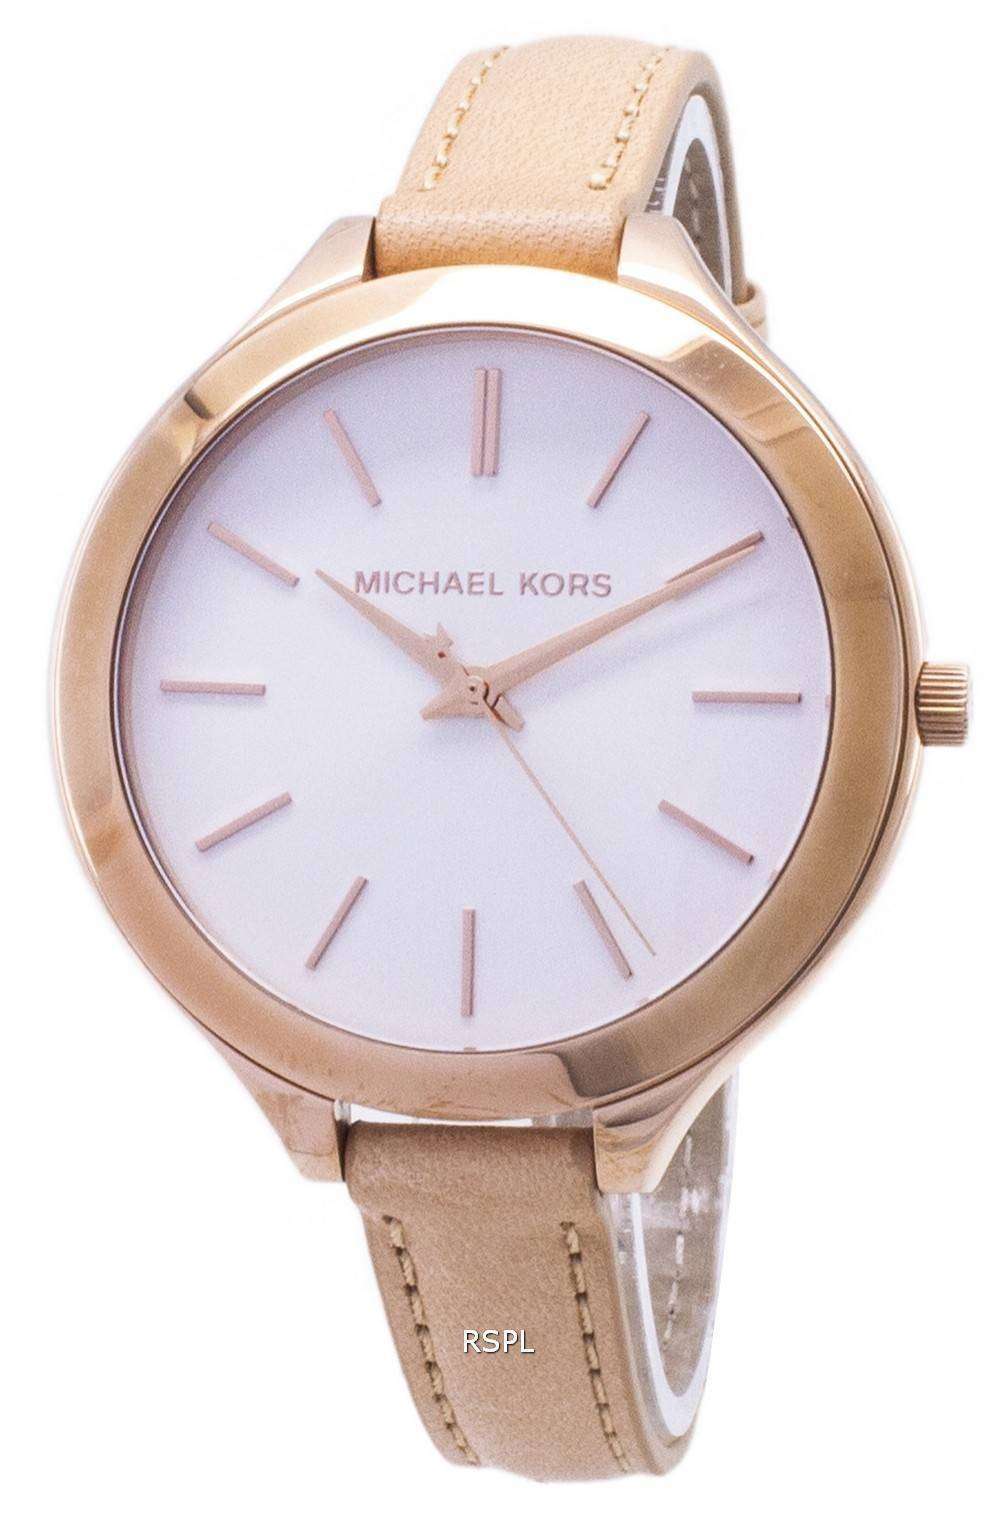 Michael kors sex and the city